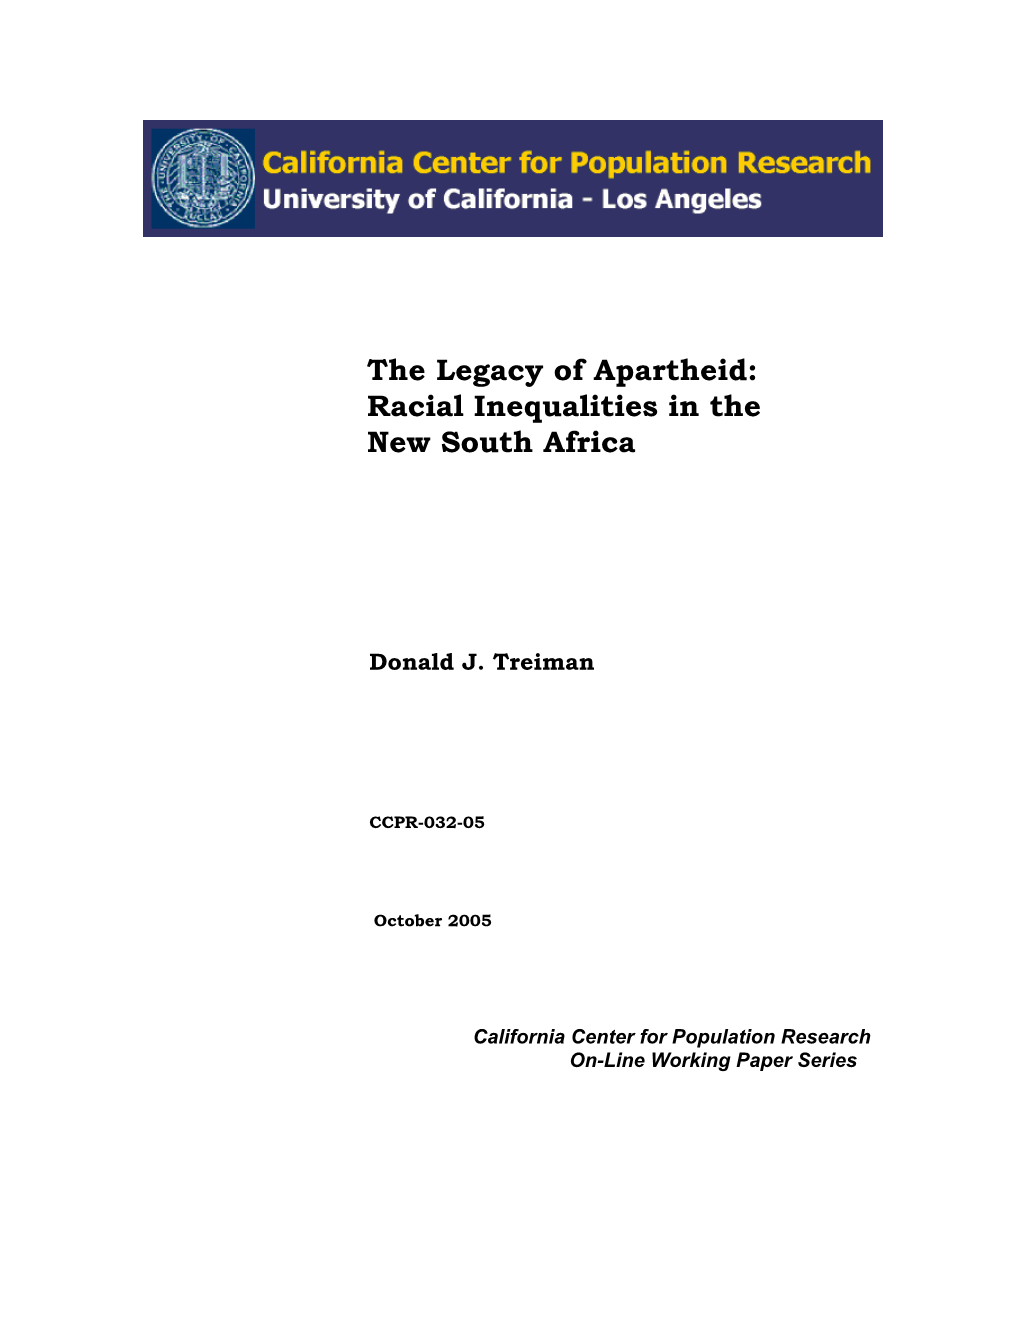 The Legacy of Apartheid: Racial Inequalities in the New South Africa